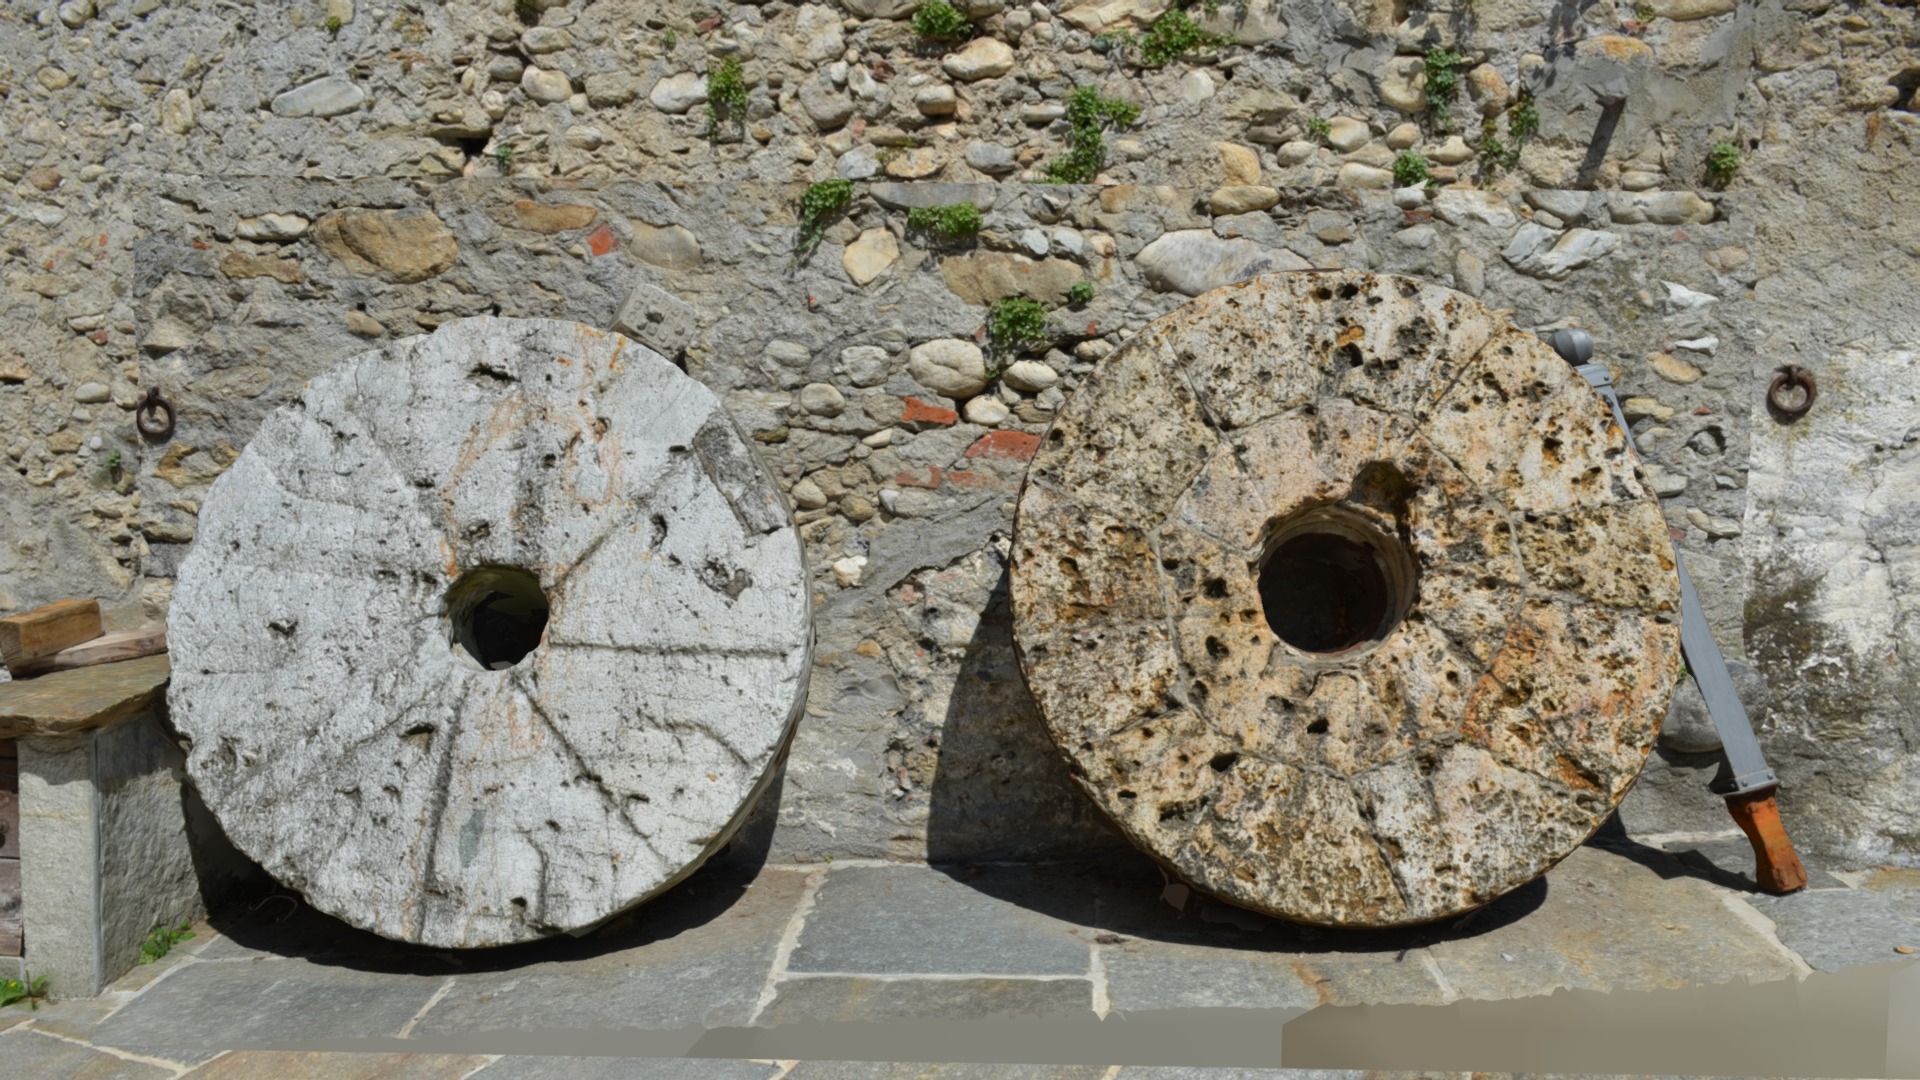 3D model Stone Wheels / 3DScan - This is a 3D model of the Stone Wheels / 3DScan. The 3D model is about a couple of round objects with holes in them on a stone surface.